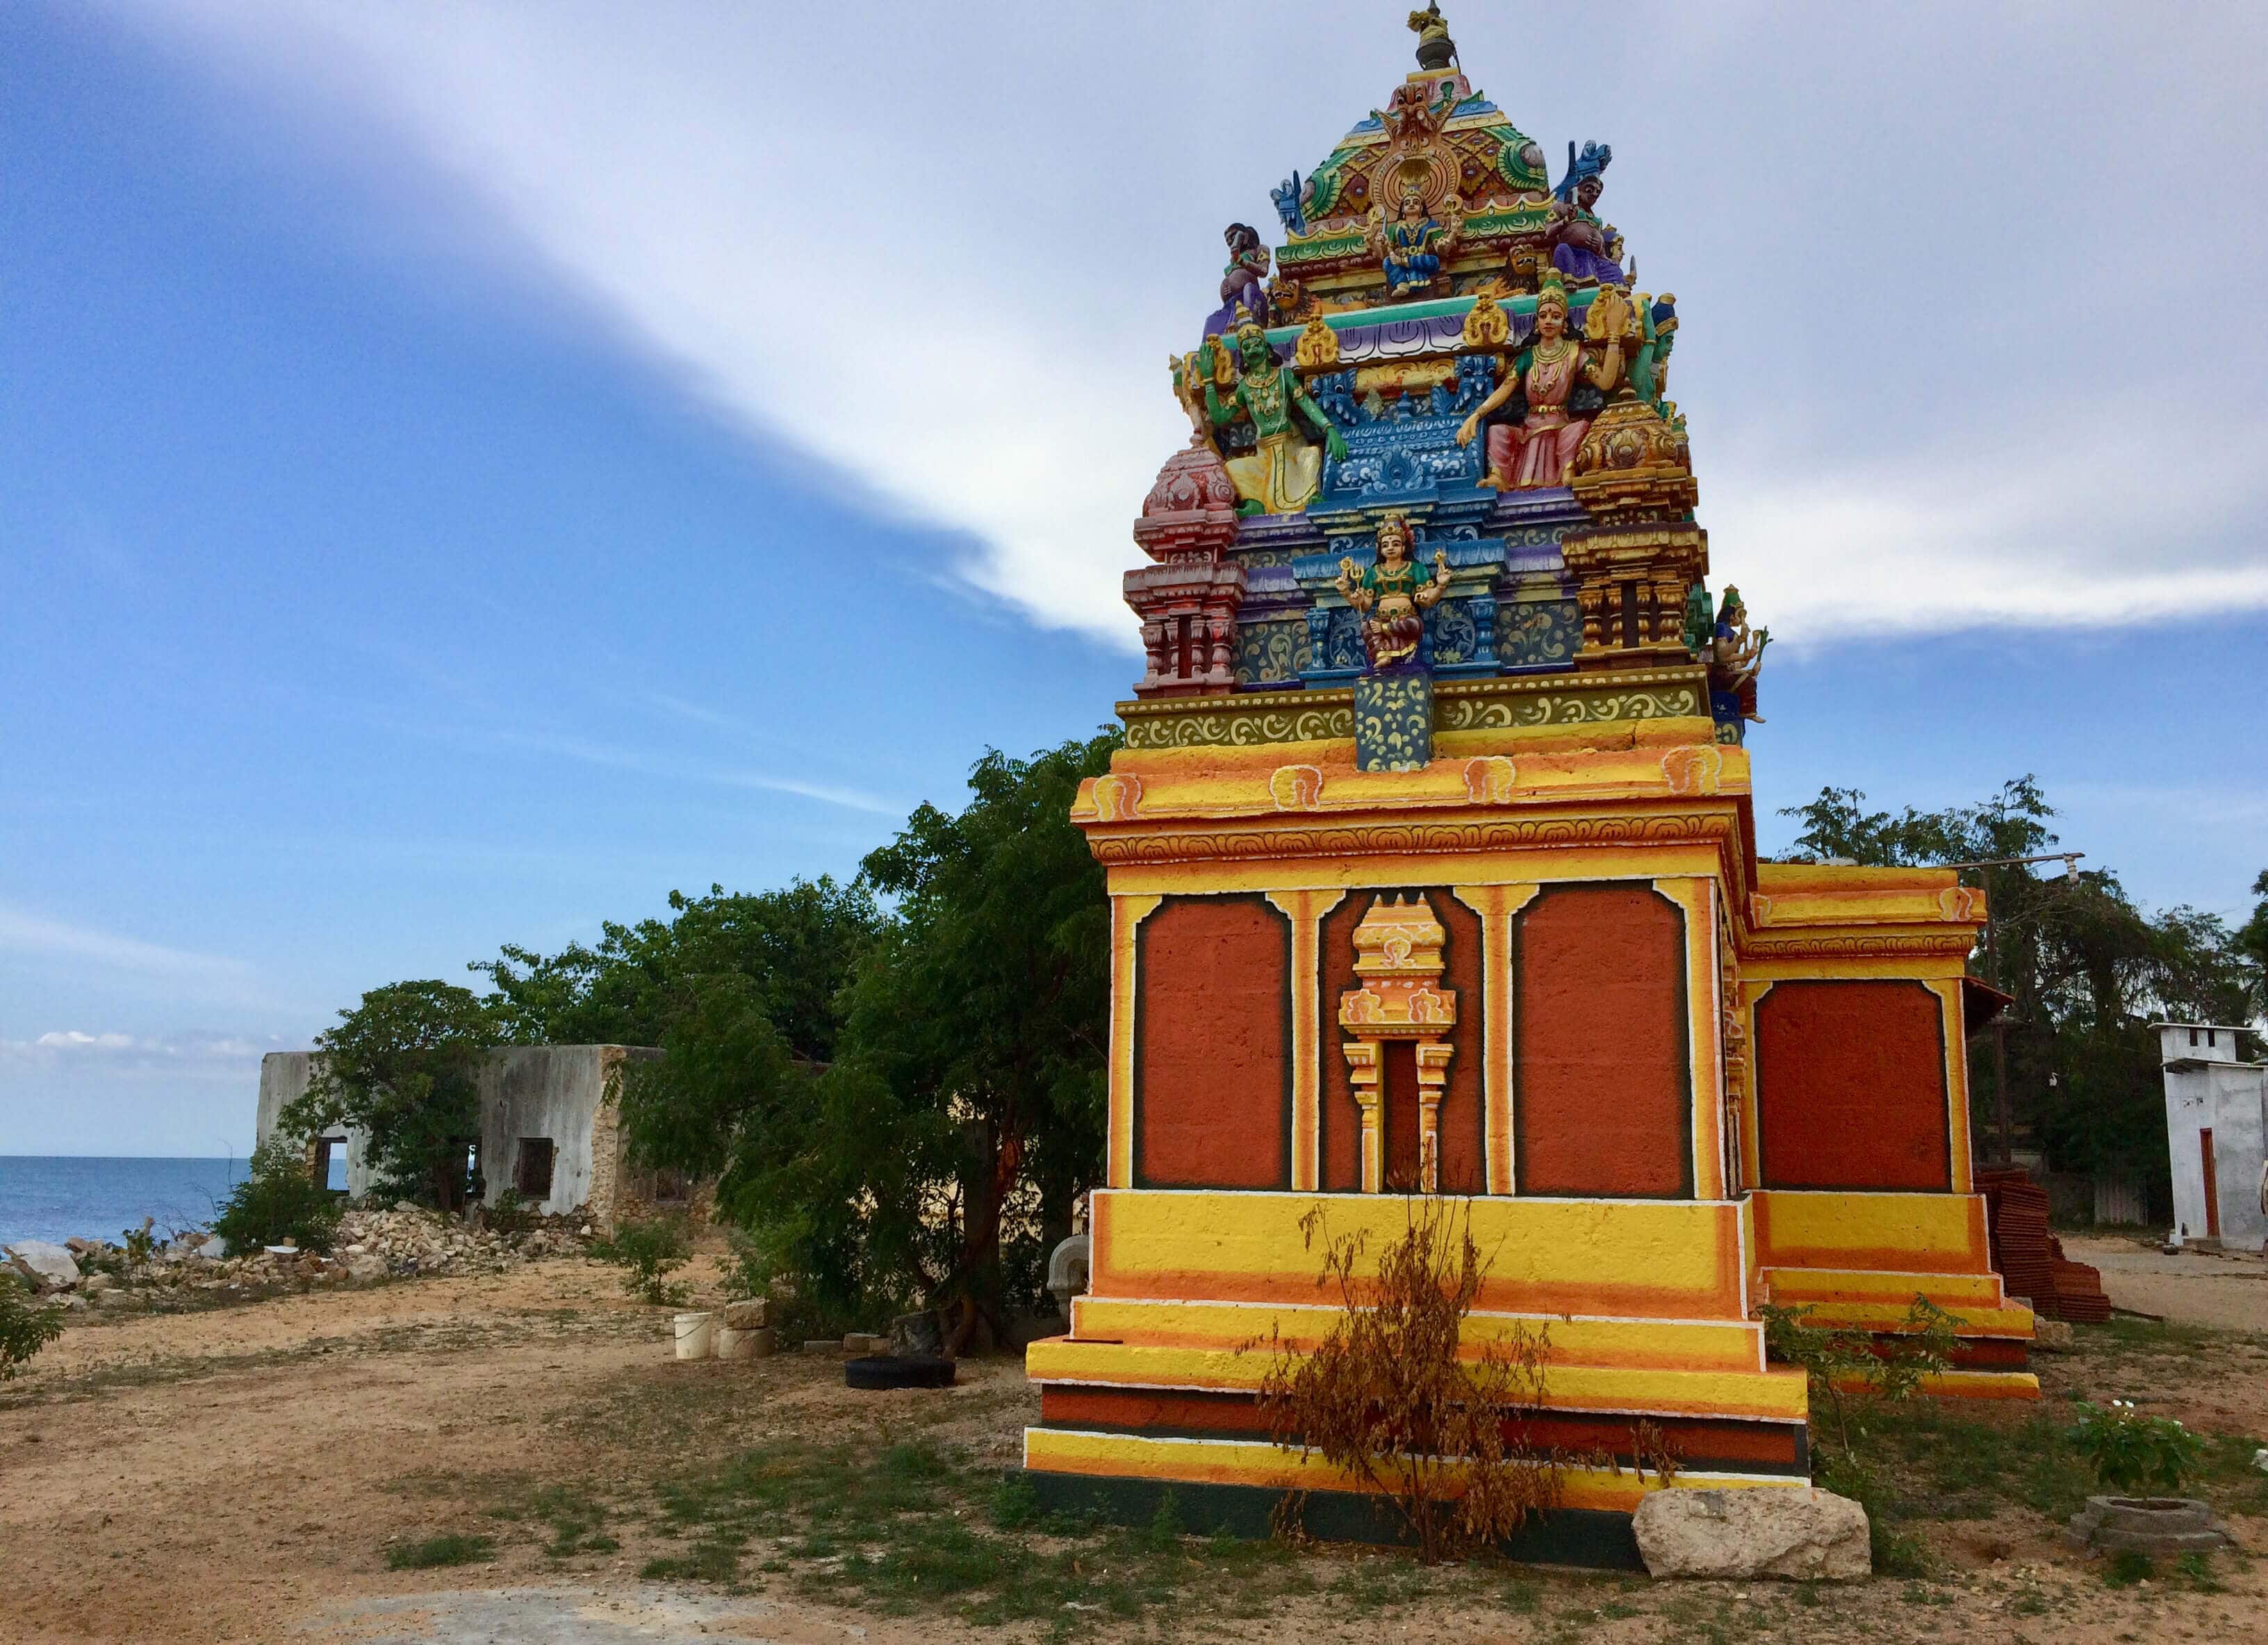 Jaffna, Sri Lanka - One of the most underrated cities in the world + why you should add it to your bucket list low!